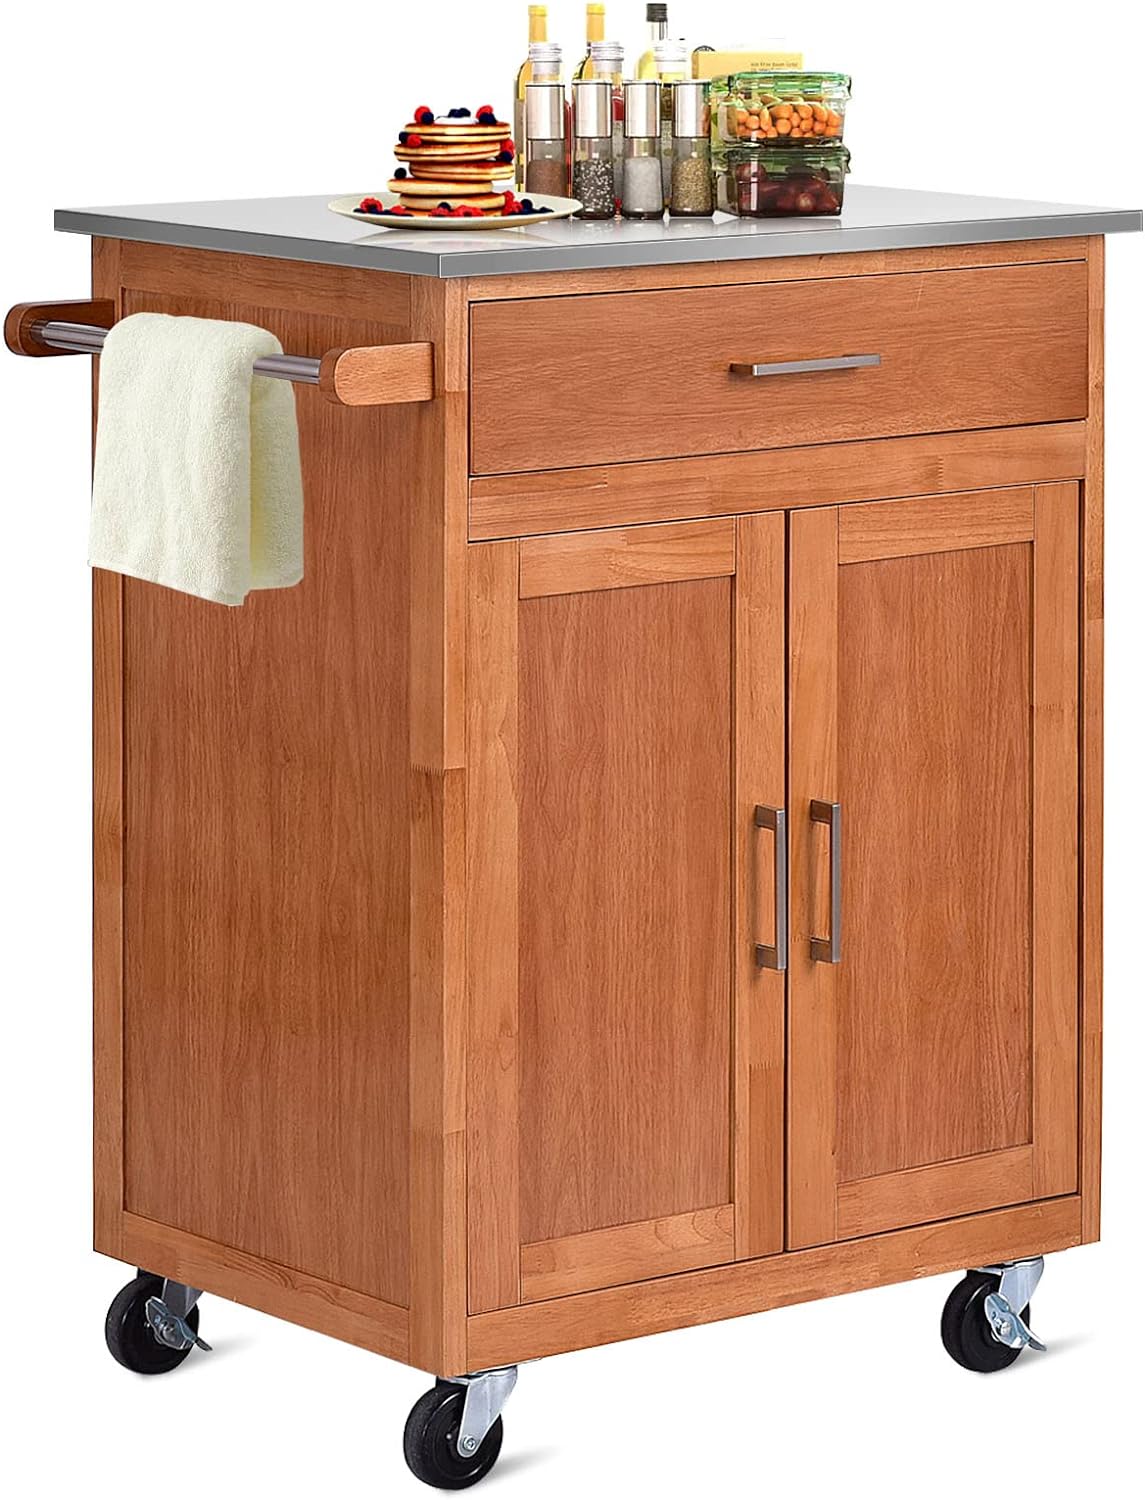 COSTWAY Kitchen Storage Island Cart on Wheels, Kitchen Rolling Trolley Cart with a Large Drawer, Stainless Steel Tabletop, Storage Cabinet and Towel Rack, 360 Wheel, for Dining Room, Living Room